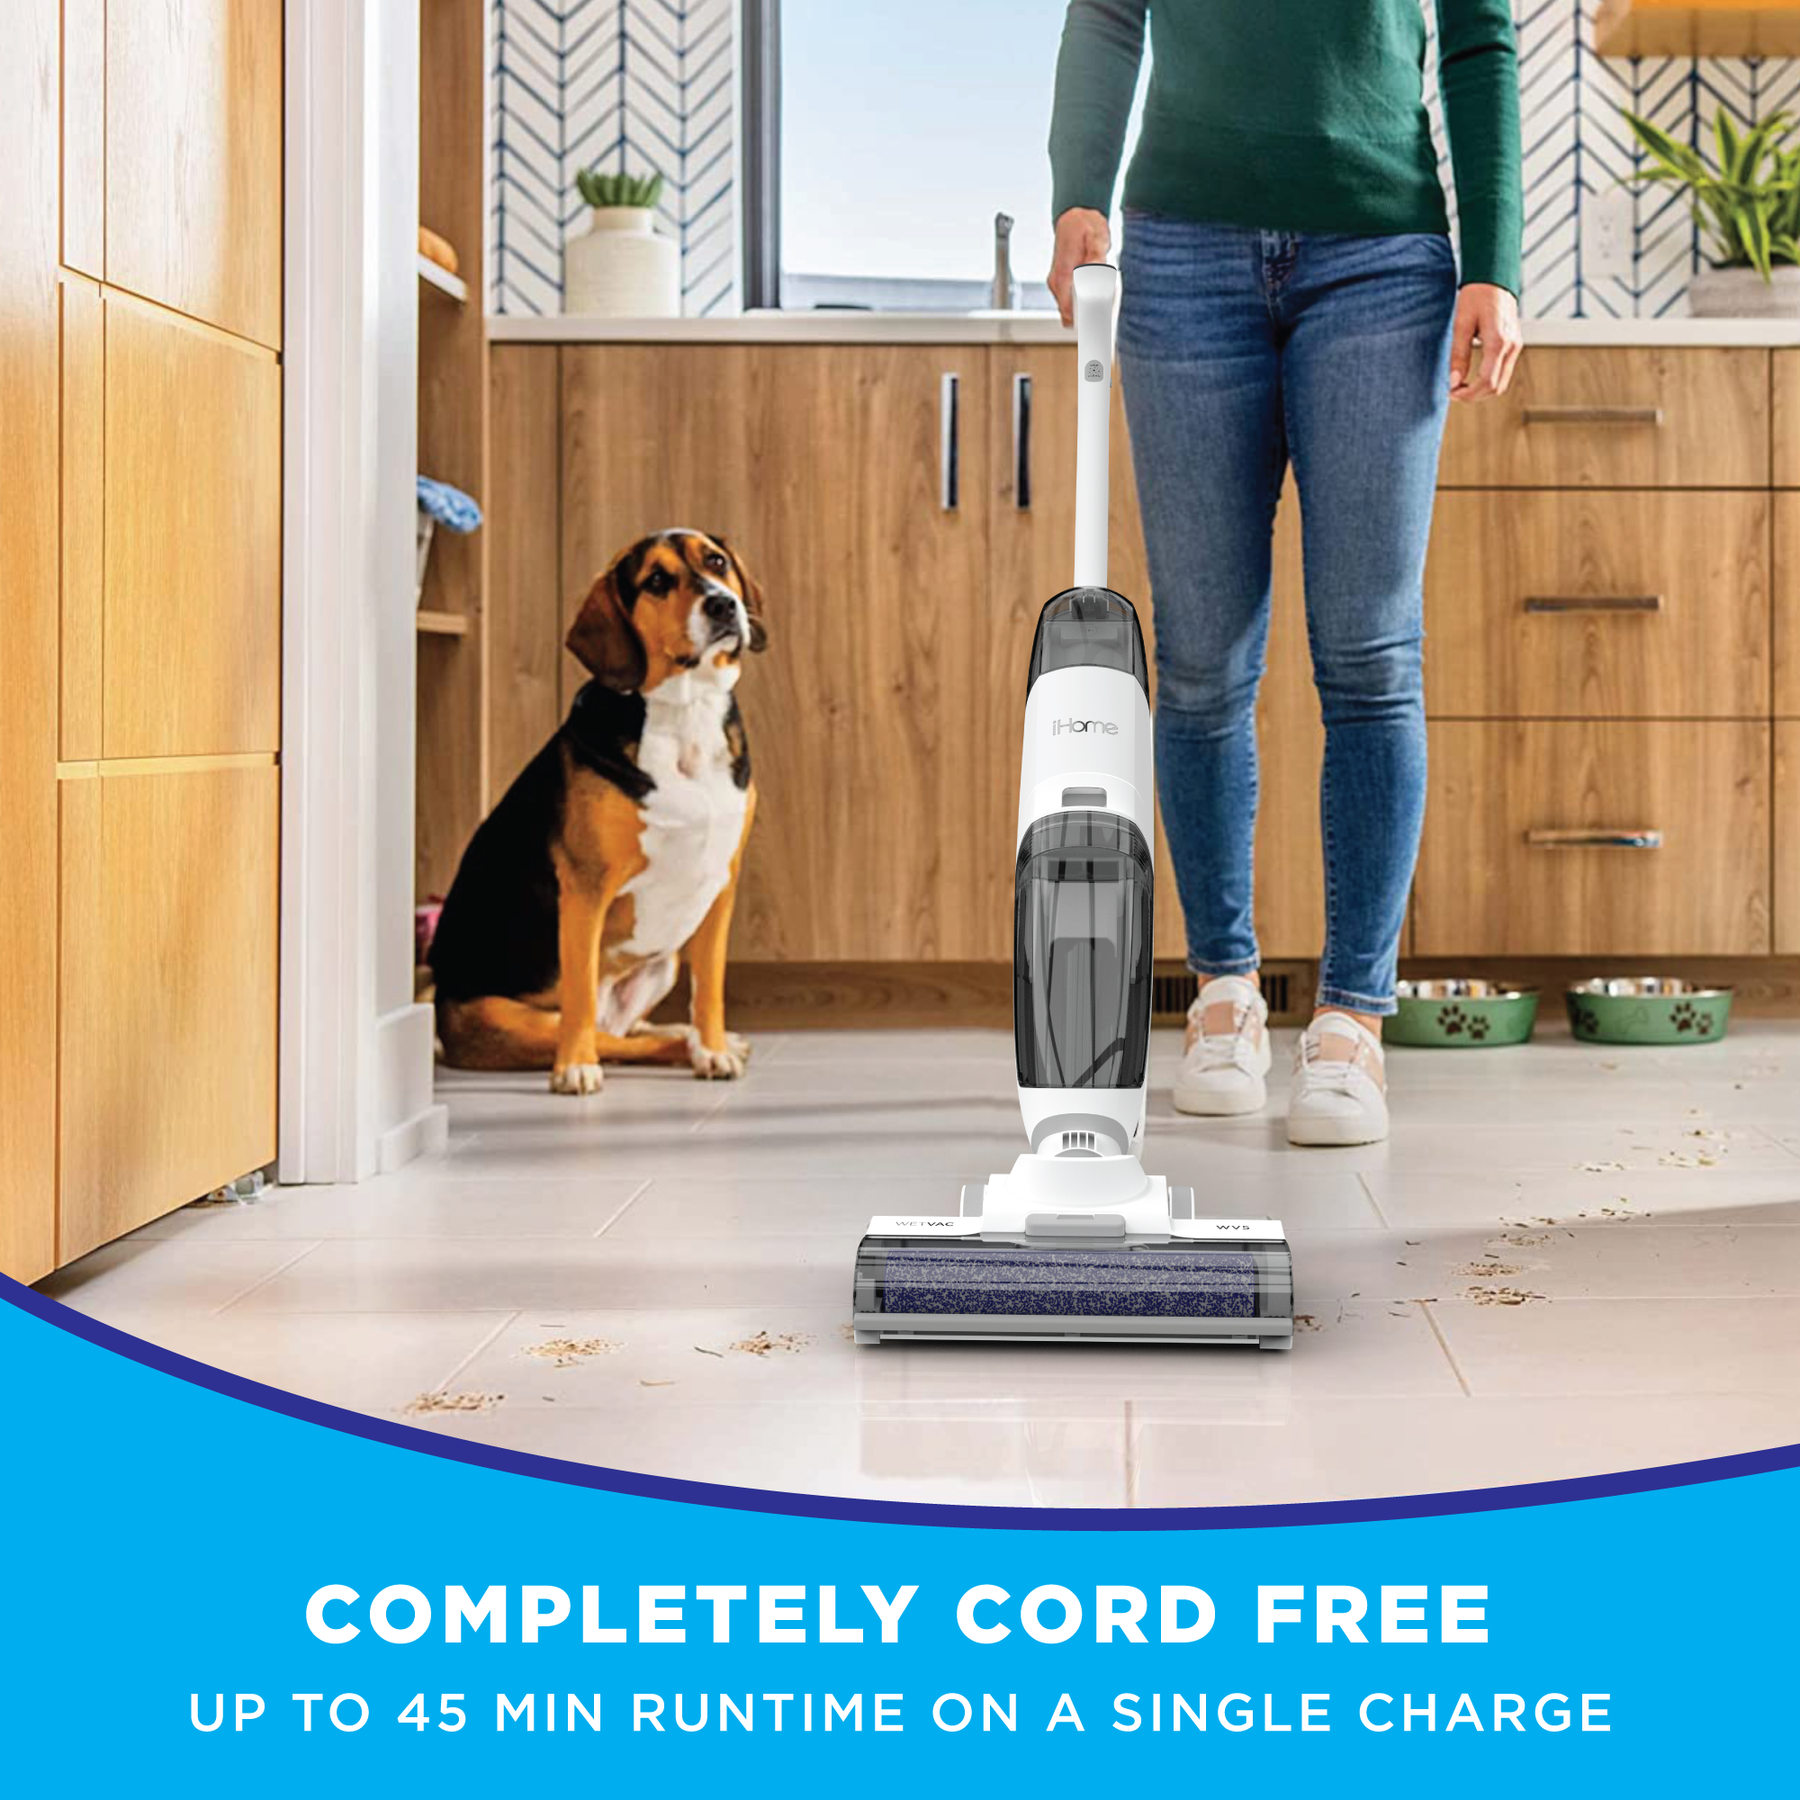 Tineco Floor One S5 Review: Dual Vacuum Mop With Power Scrub